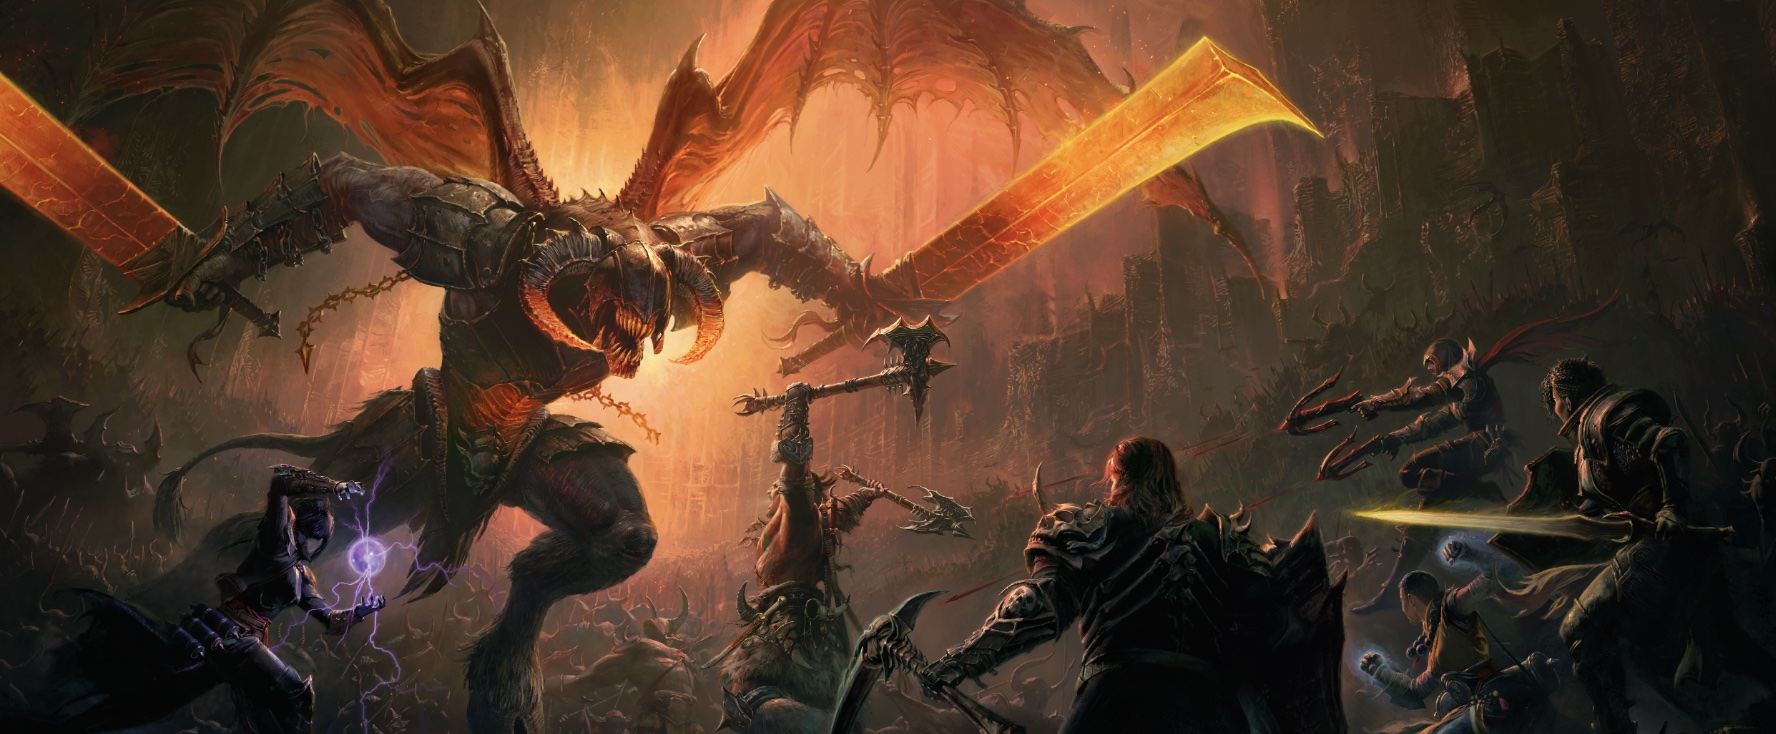 Blizzard earned $49m from Diablo Immortal's first month, with 10m